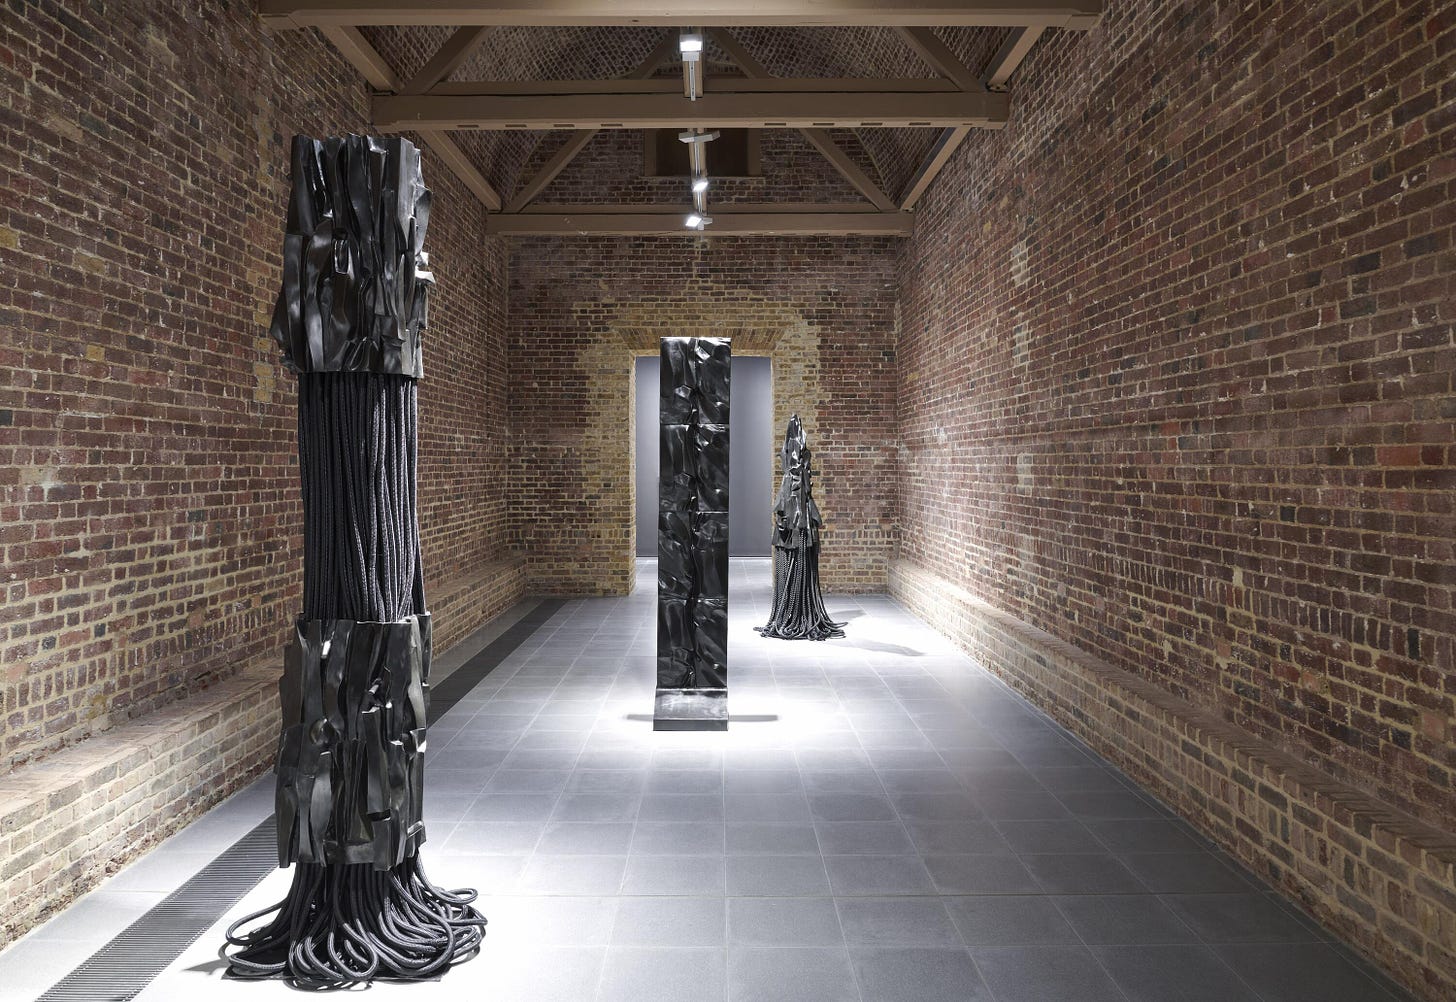 Barbara Chase-Riboud: Infinite Folds at the Serpentine review